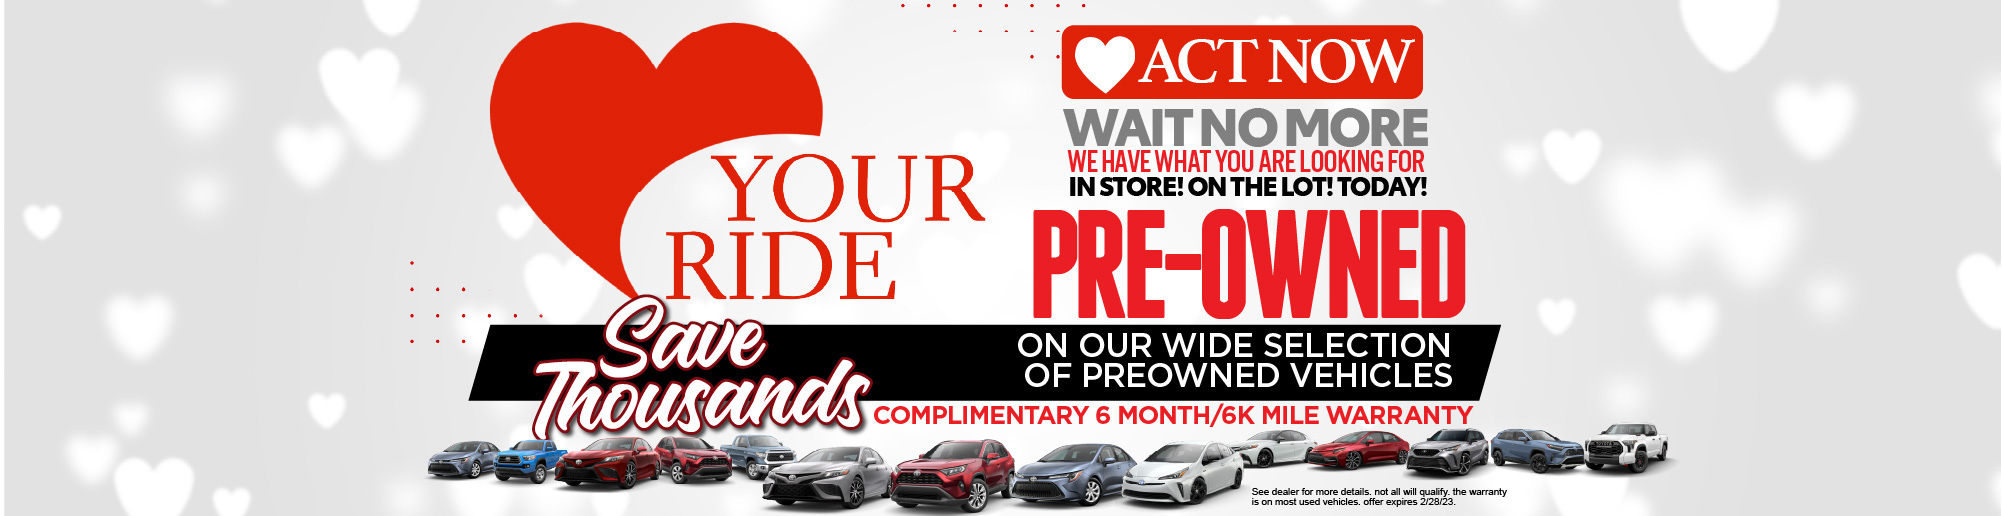 Pre-Owned Save Thousands! Act Now! On Our Wide Selection of Pre-Owned Models| Complimentary 6 month/6K Mile Warranty